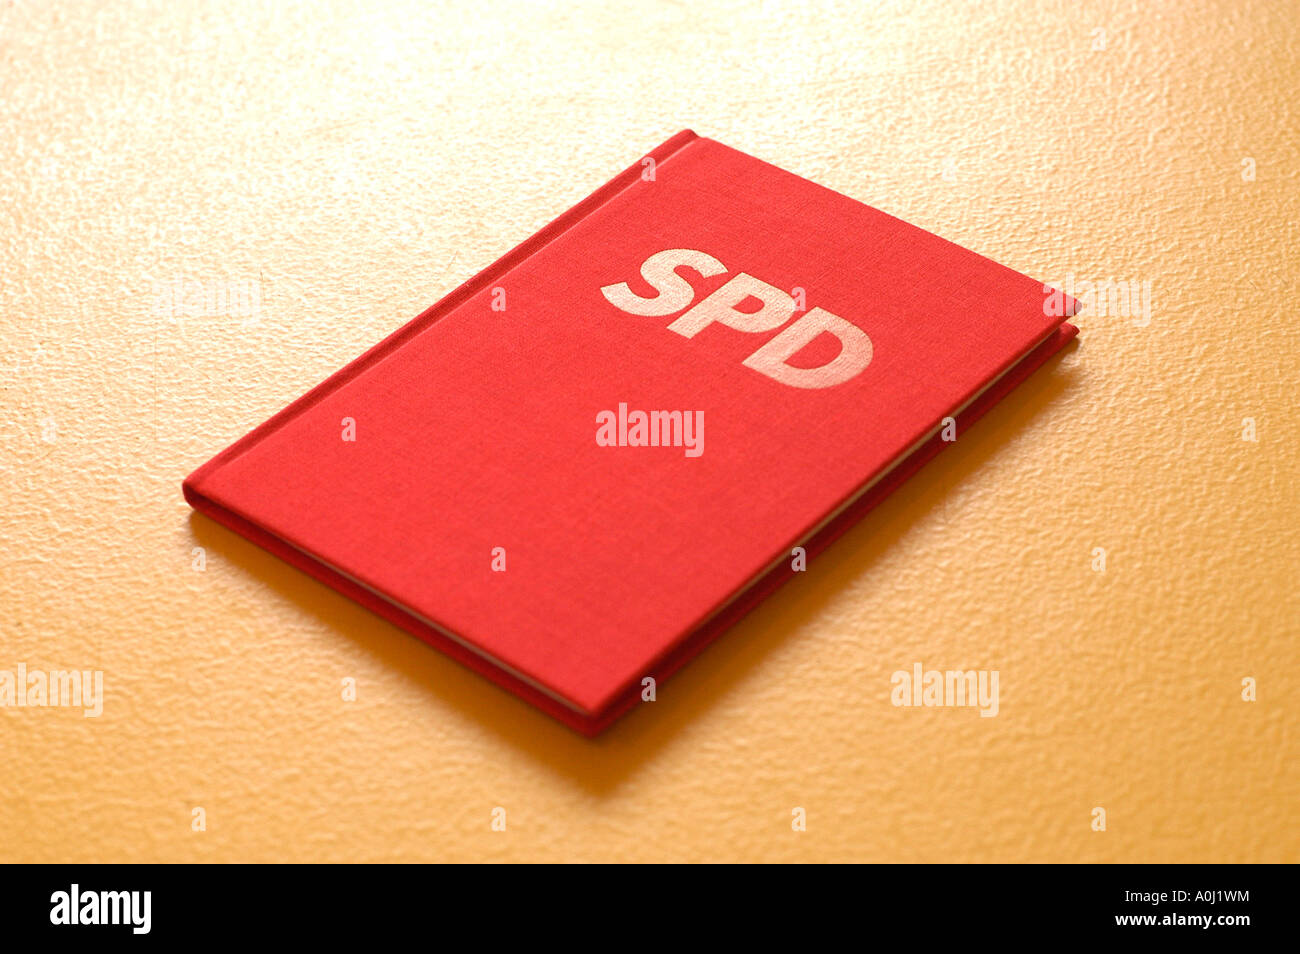 Membership-book SPD (Socialist Party Germany) on yellow background Stock Photo